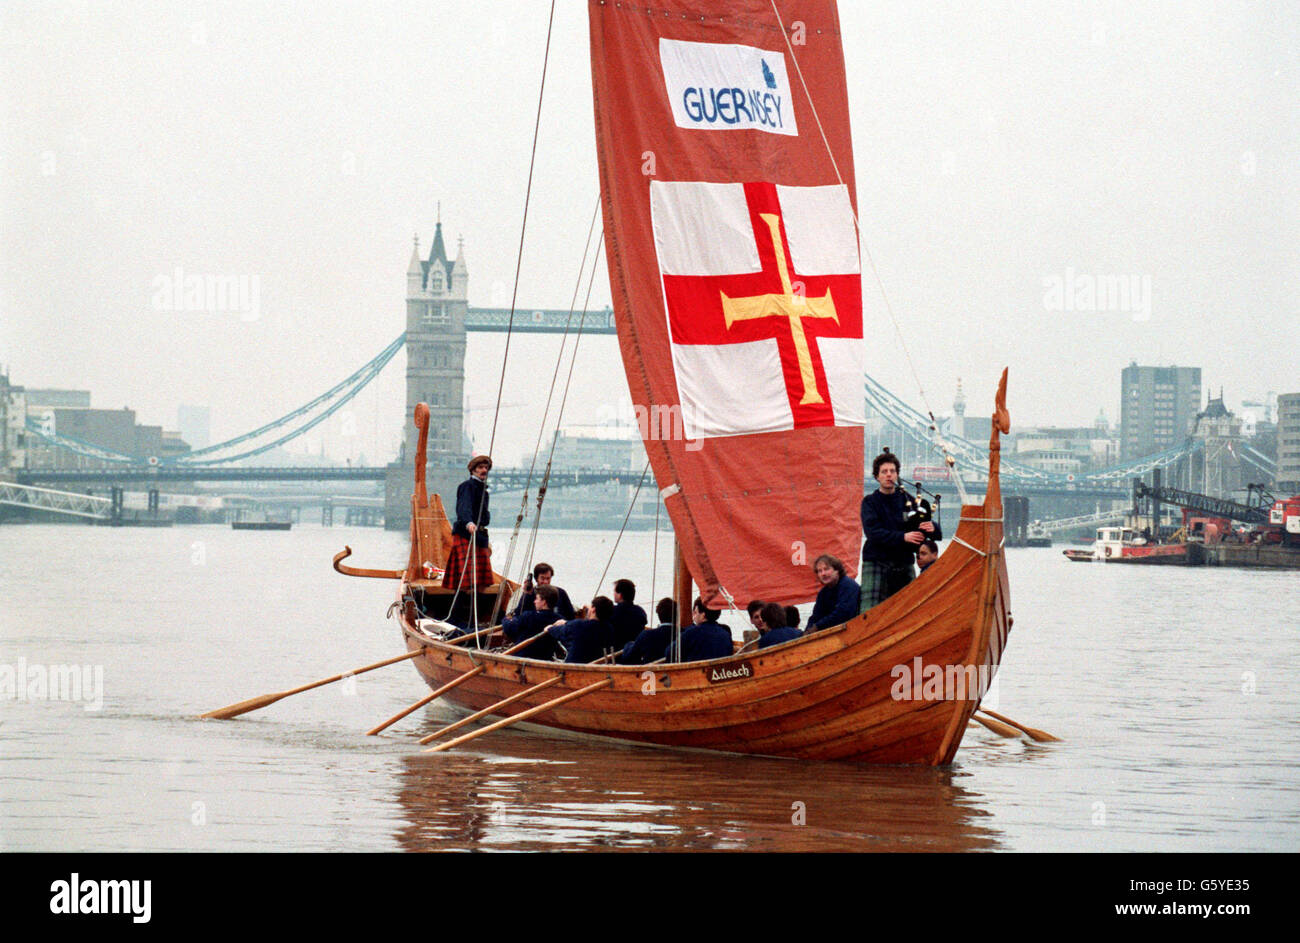 Aileach', a recreated 15th century Hebridean galley, makes an impressive sight as she sails down the Thames on her way to the International Boat Show at Earls Court. the sixteen oared square rigged galley, manned by a crew from Operation Raleigh and the Galley Trust, will be featured in the show. Stock Photo